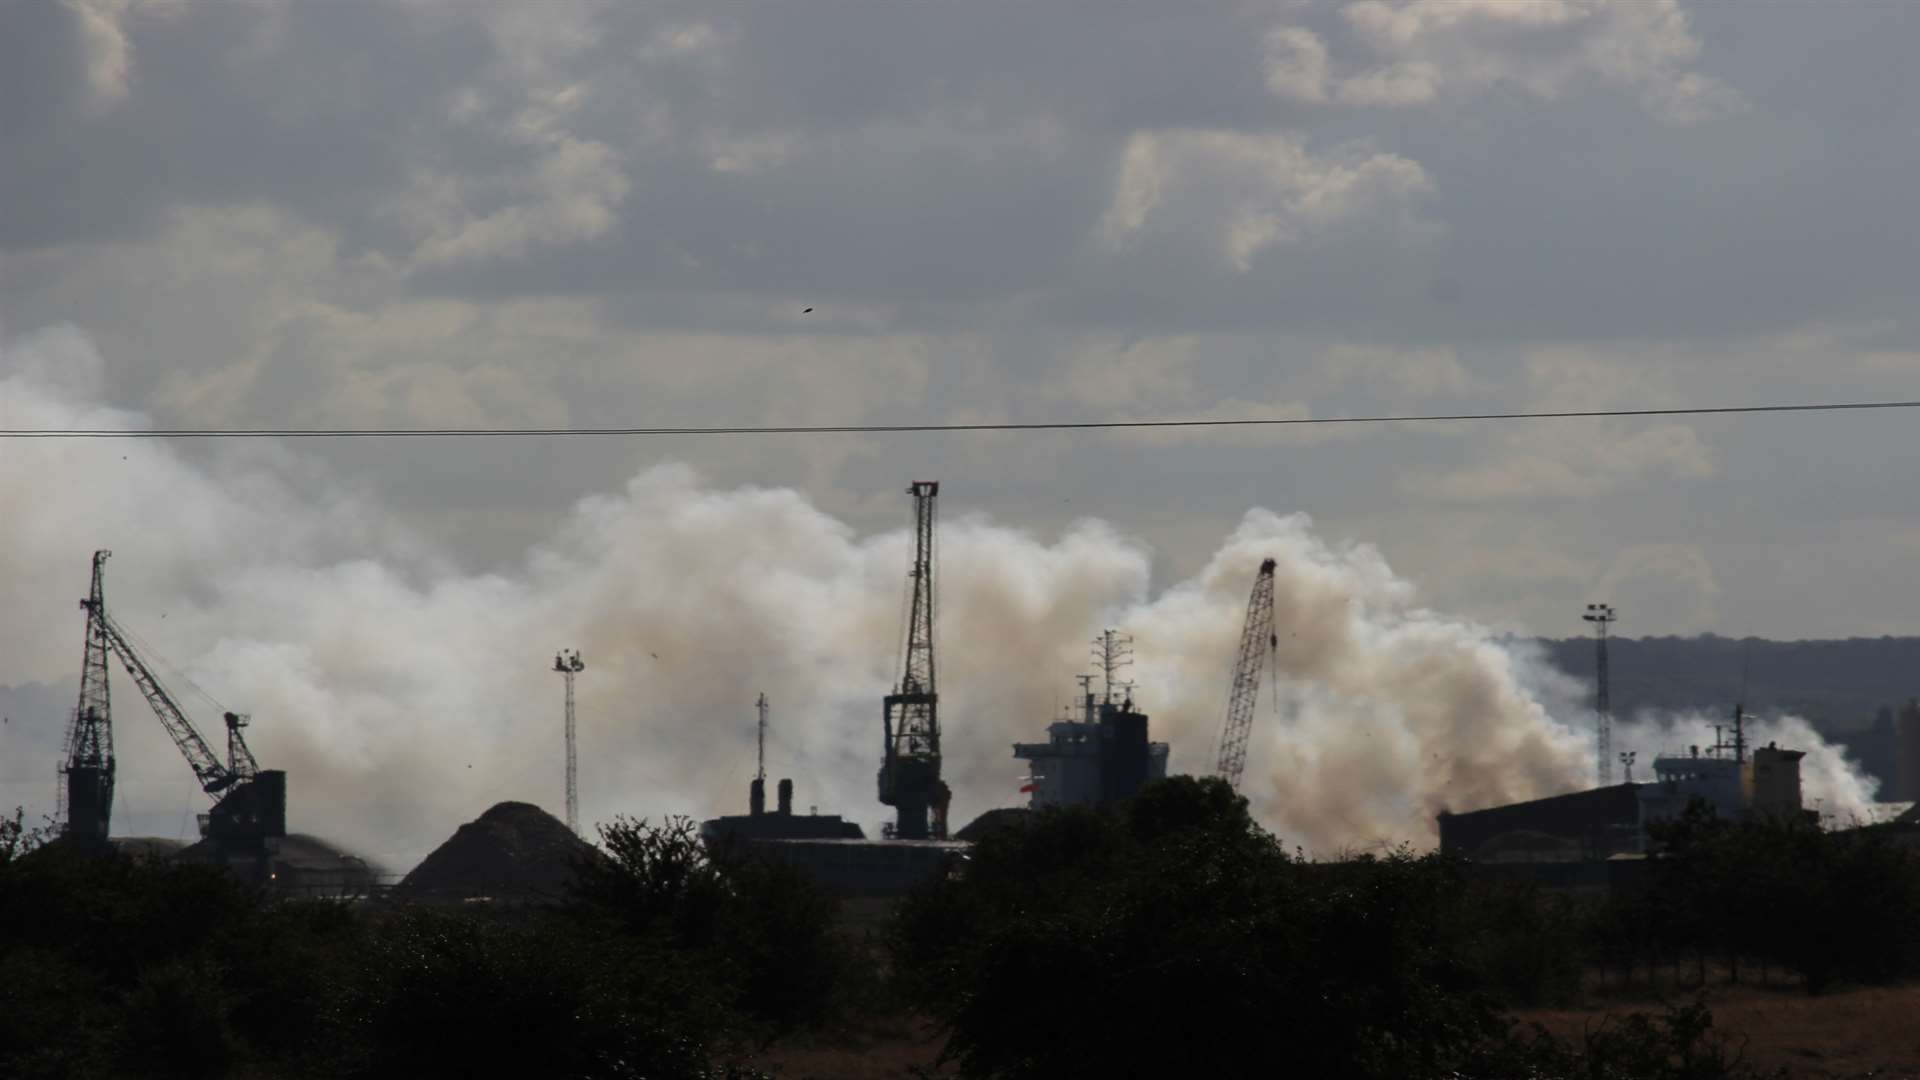 Smoke could be seen from the Isle of Sheppey